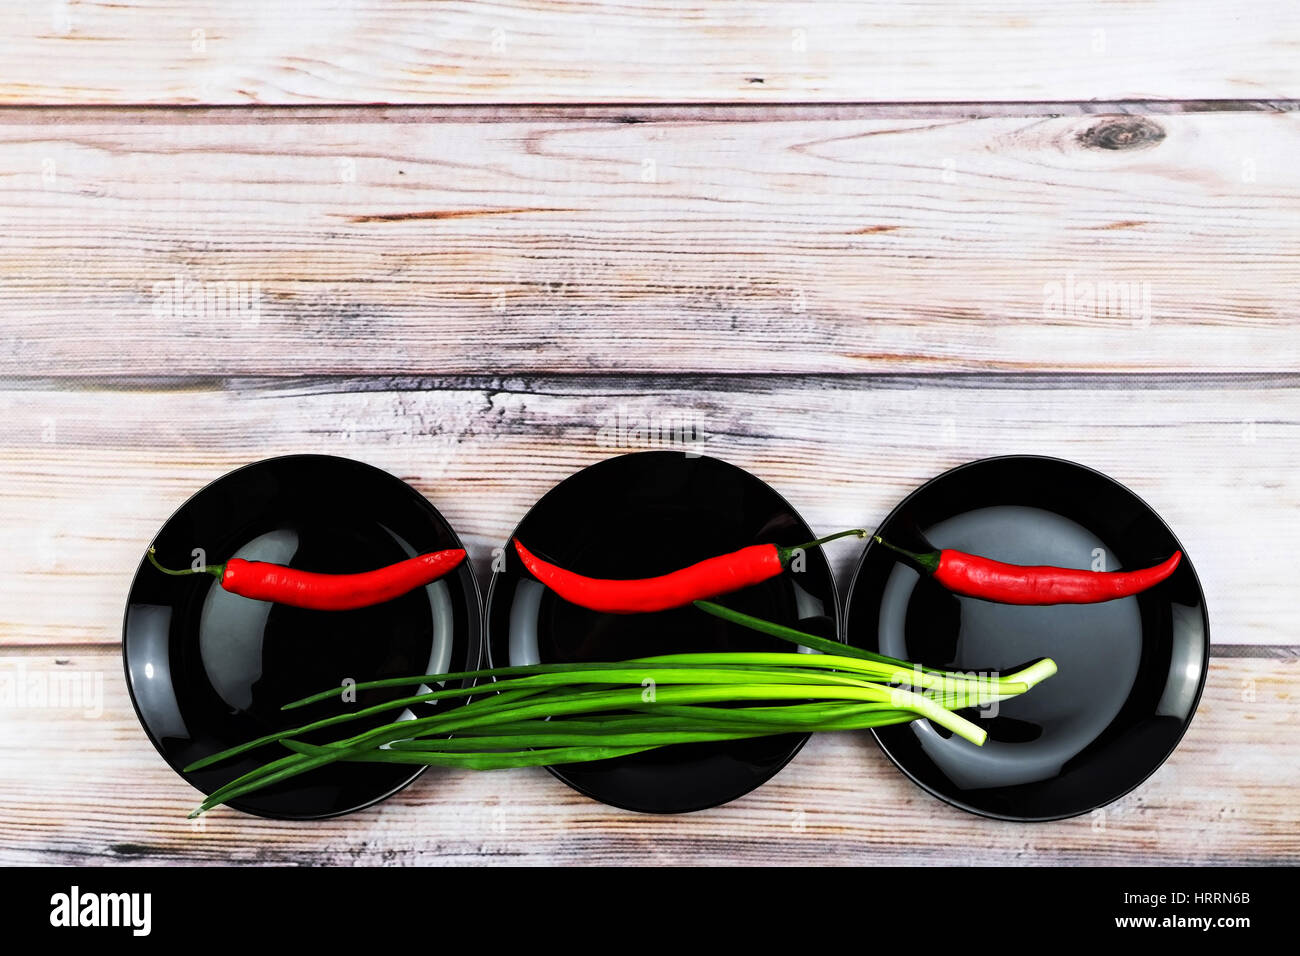 Red peppers on black dish. Green onions on black shiny plates. Vegetables in plates over wooden background. Colorful food background. Free space for t Stock Photo